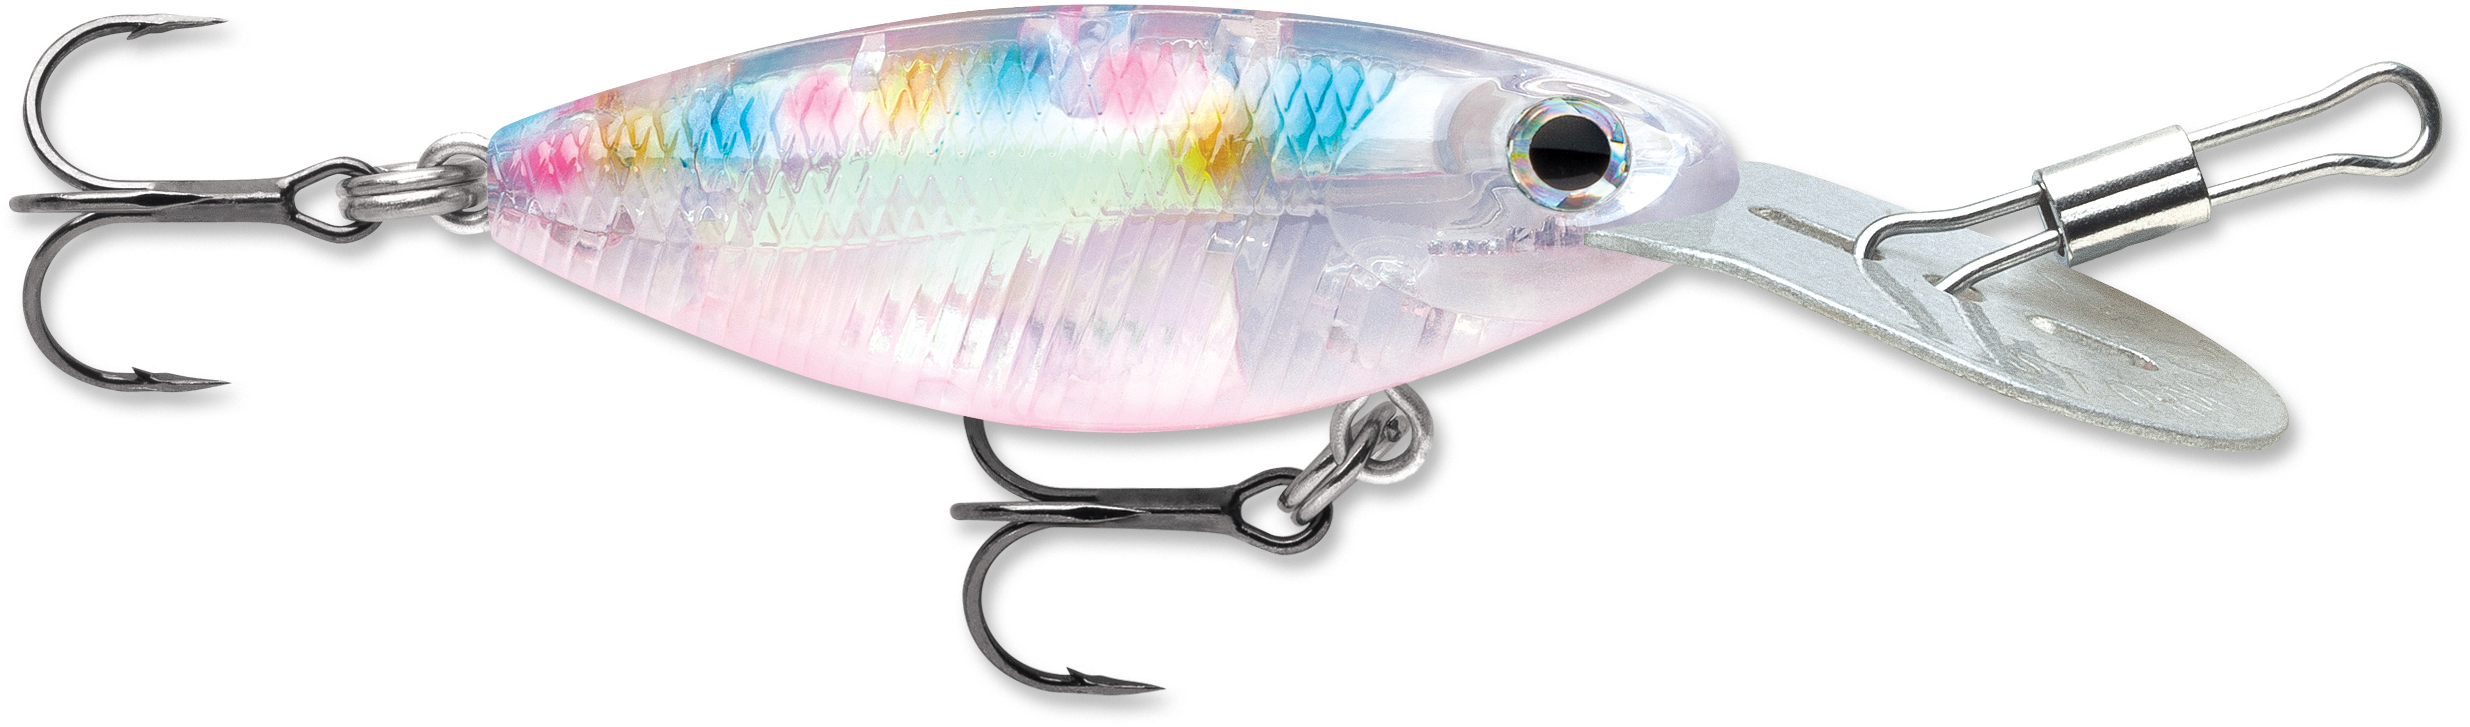 Storm Hot 'n Tot MadFlash Chrome Yellow Perch; 2 in.